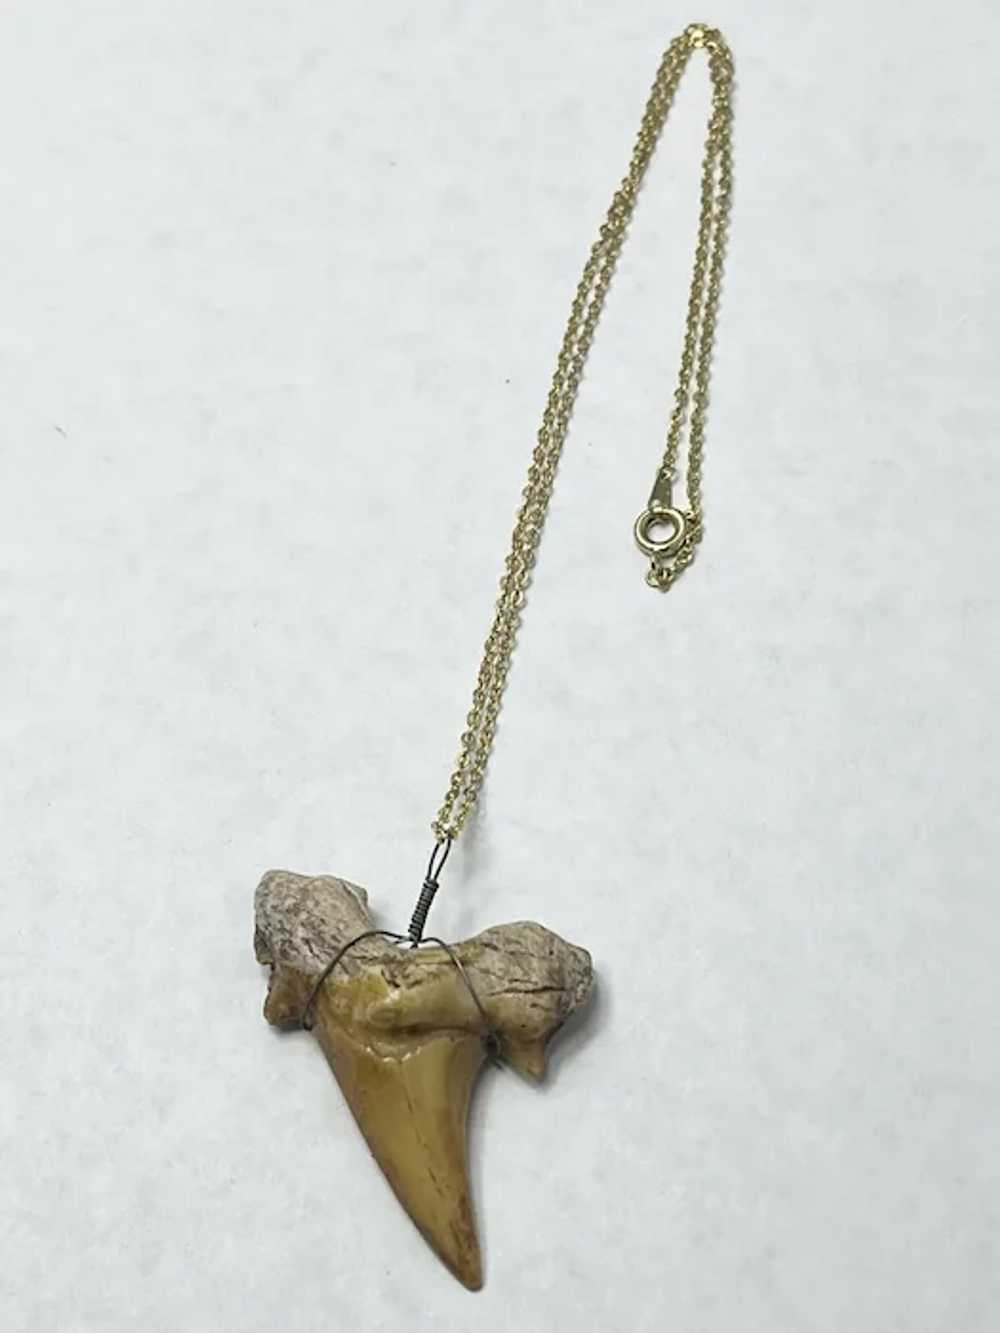 Vintage Shark Tooth Pendant Necklace - image 4